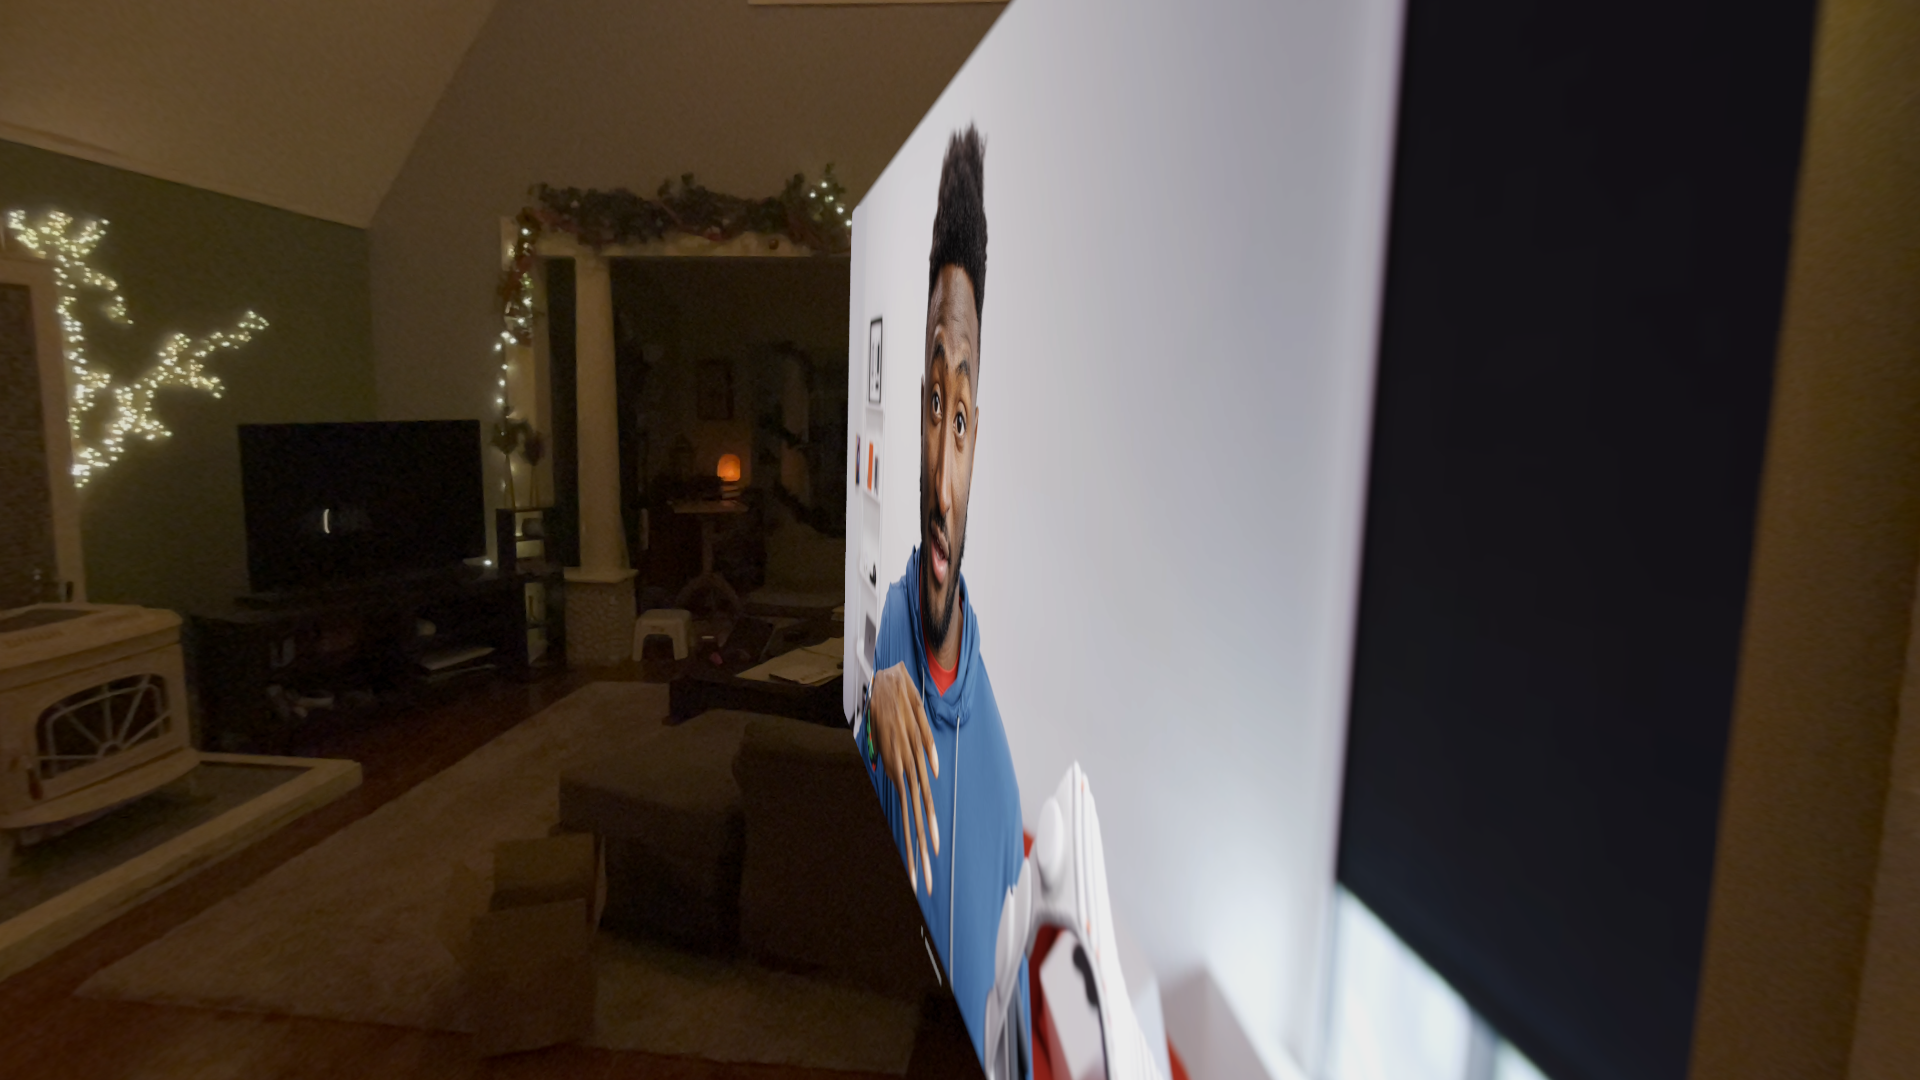 A large, three-dimensional head-and-shoulder depiction of a man emerges from a flat surface, dominating a dimly lit living room adorned with festive lights.